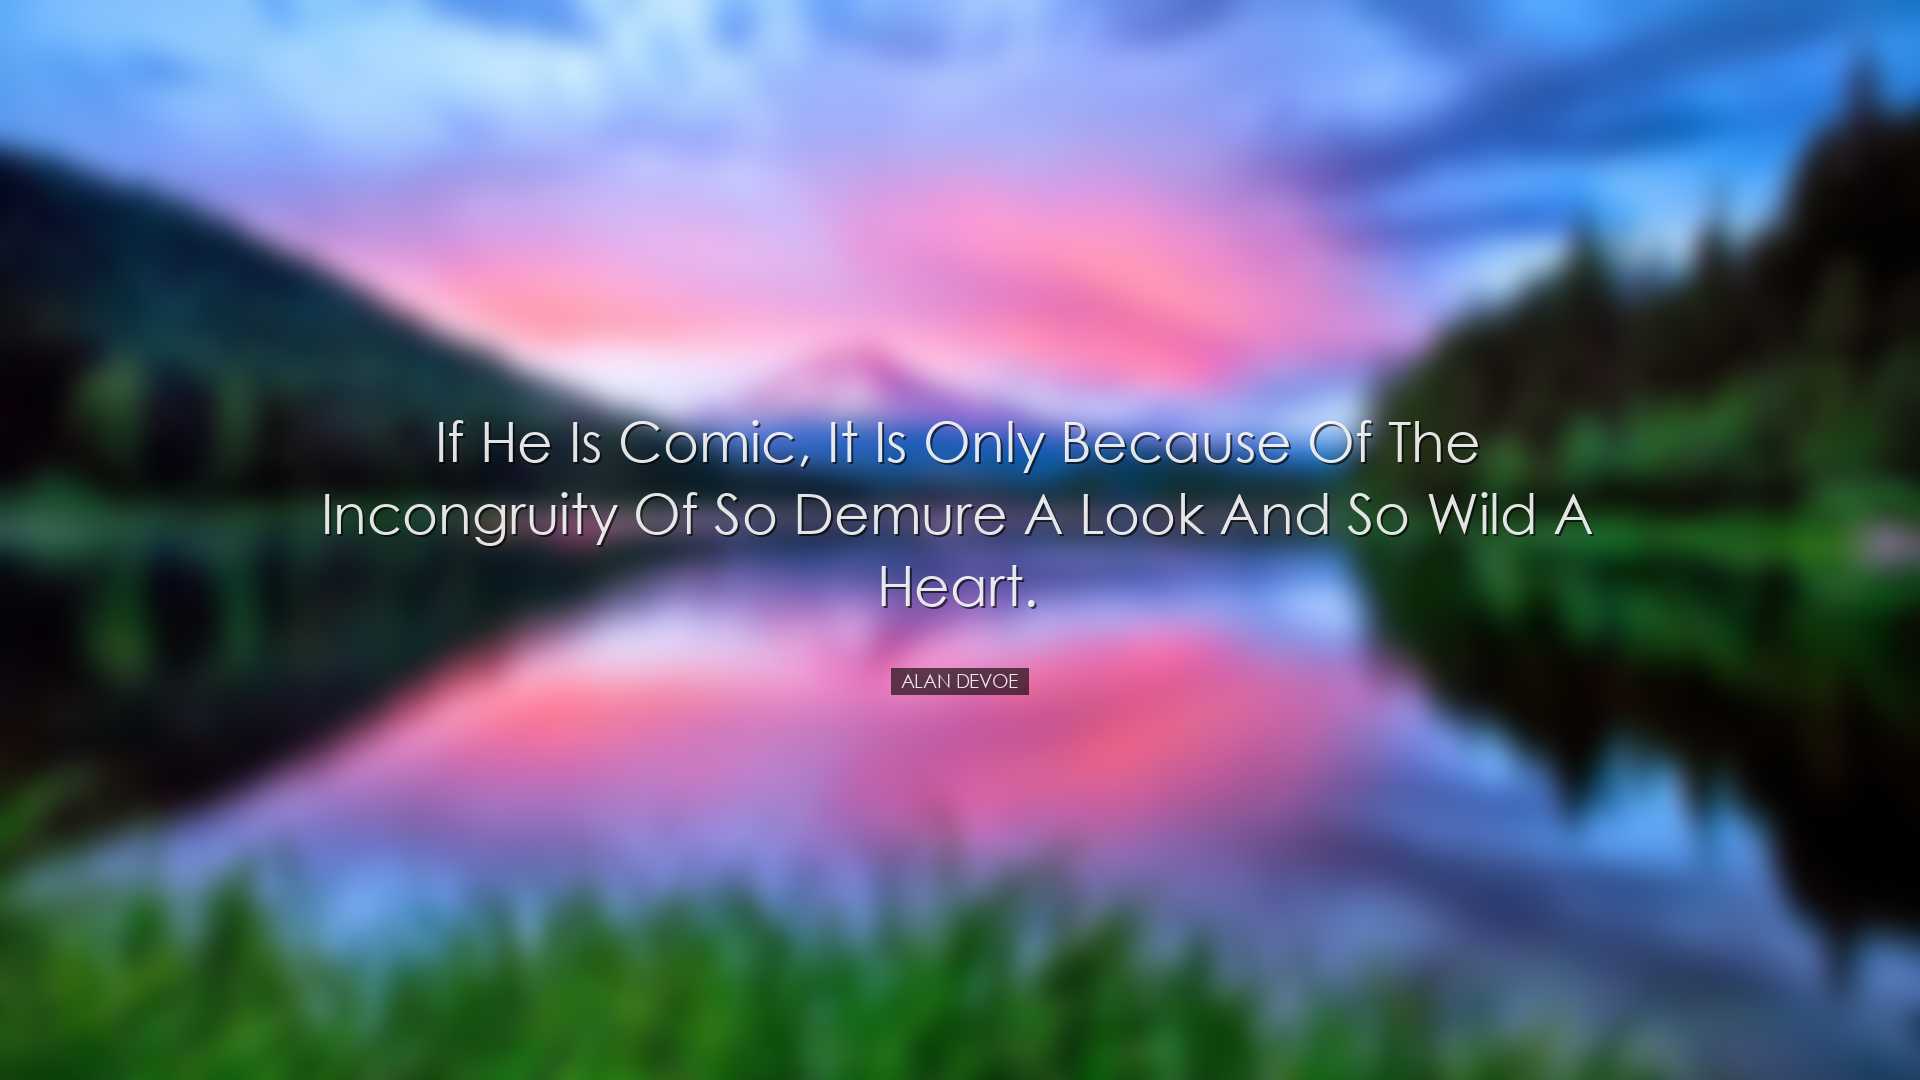 If he is comic, it is only because of the incongruity of so demure